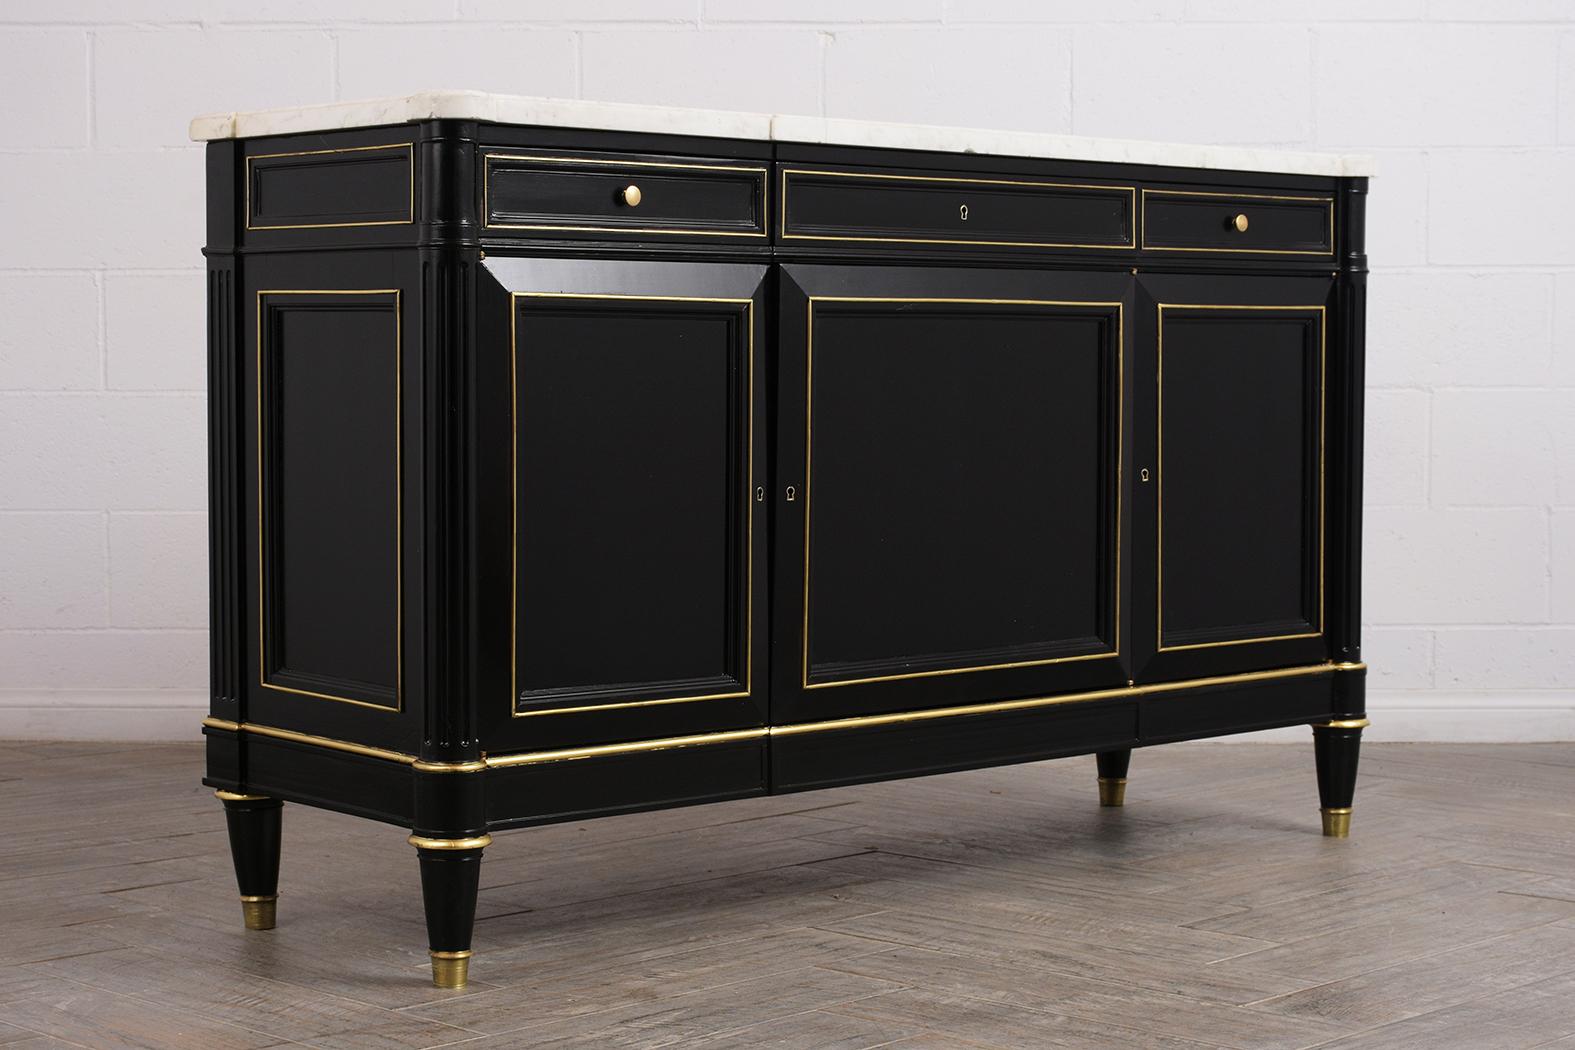 This 1900s Louis XVI-style mahogany buffet has the original white Carrara marble top with beveled edges, elegant ebonized and polished finish. The buffet has three drawers along the top, and centre drawer has a brass keyhole and lock. The bottom has